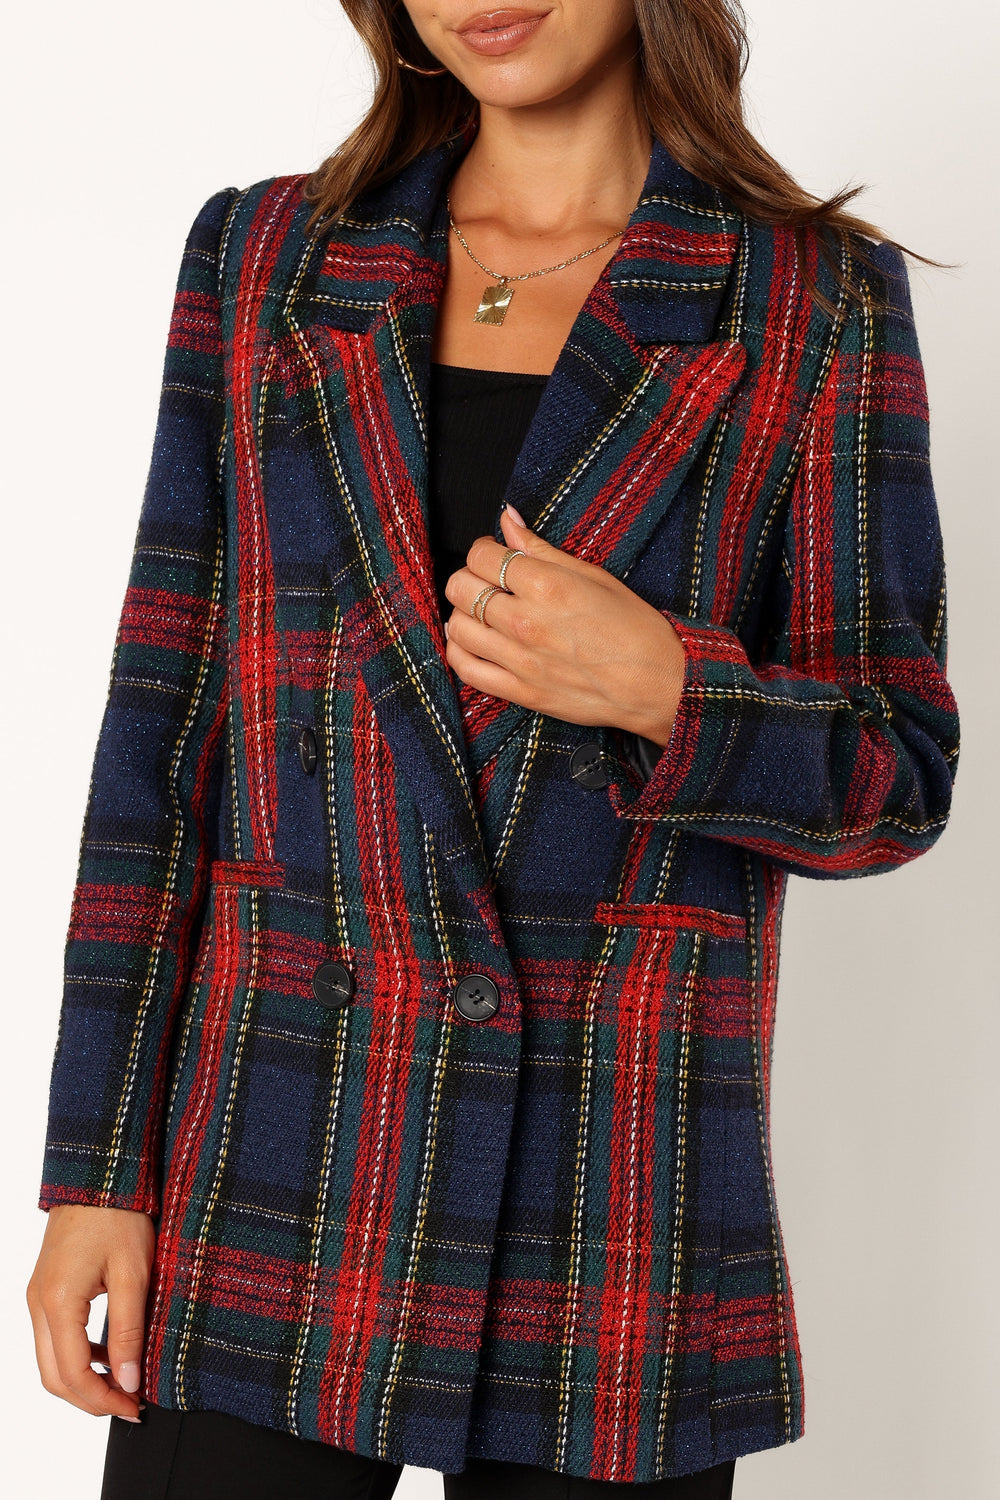 Petal and Pup USA OUTERWEAR Vivienne Plaid Blazer - Red/Navy Multi